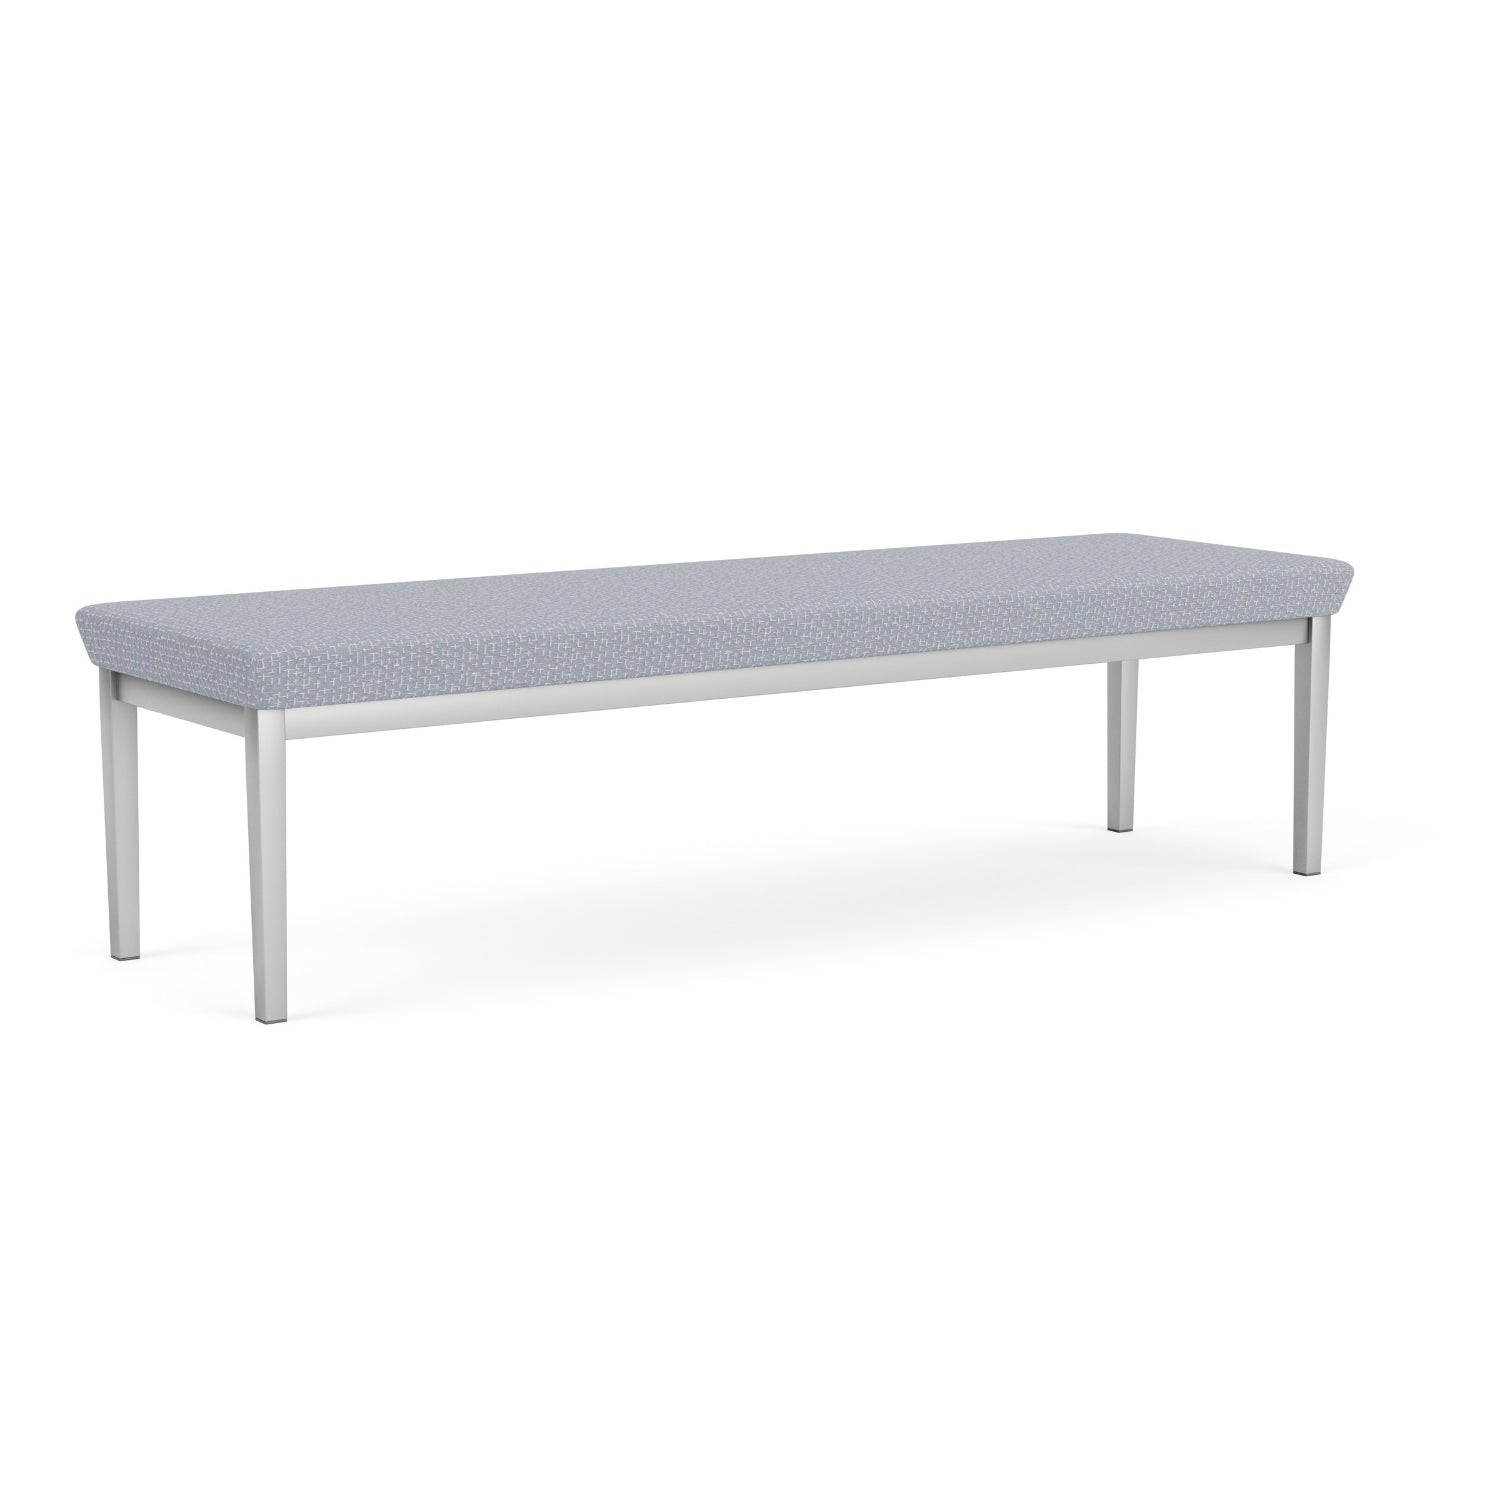 Amherst Steel Collection Reception Seating, 3 Seat Bench, Designer Fabric Upholstery, FREE SHIPPING